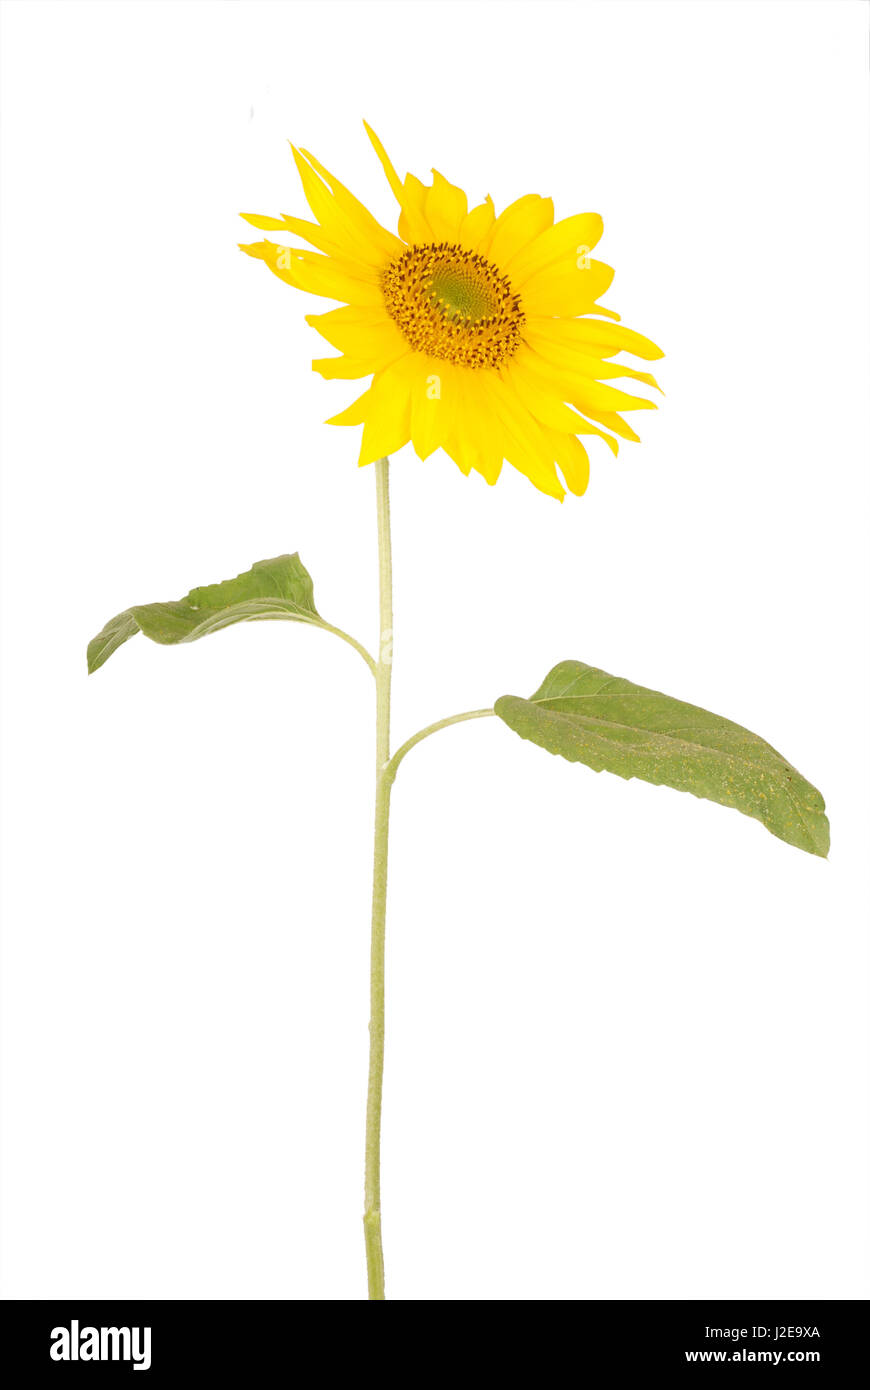 Beautiful yellow sunflower facing to the right isolated on white Stock Photo